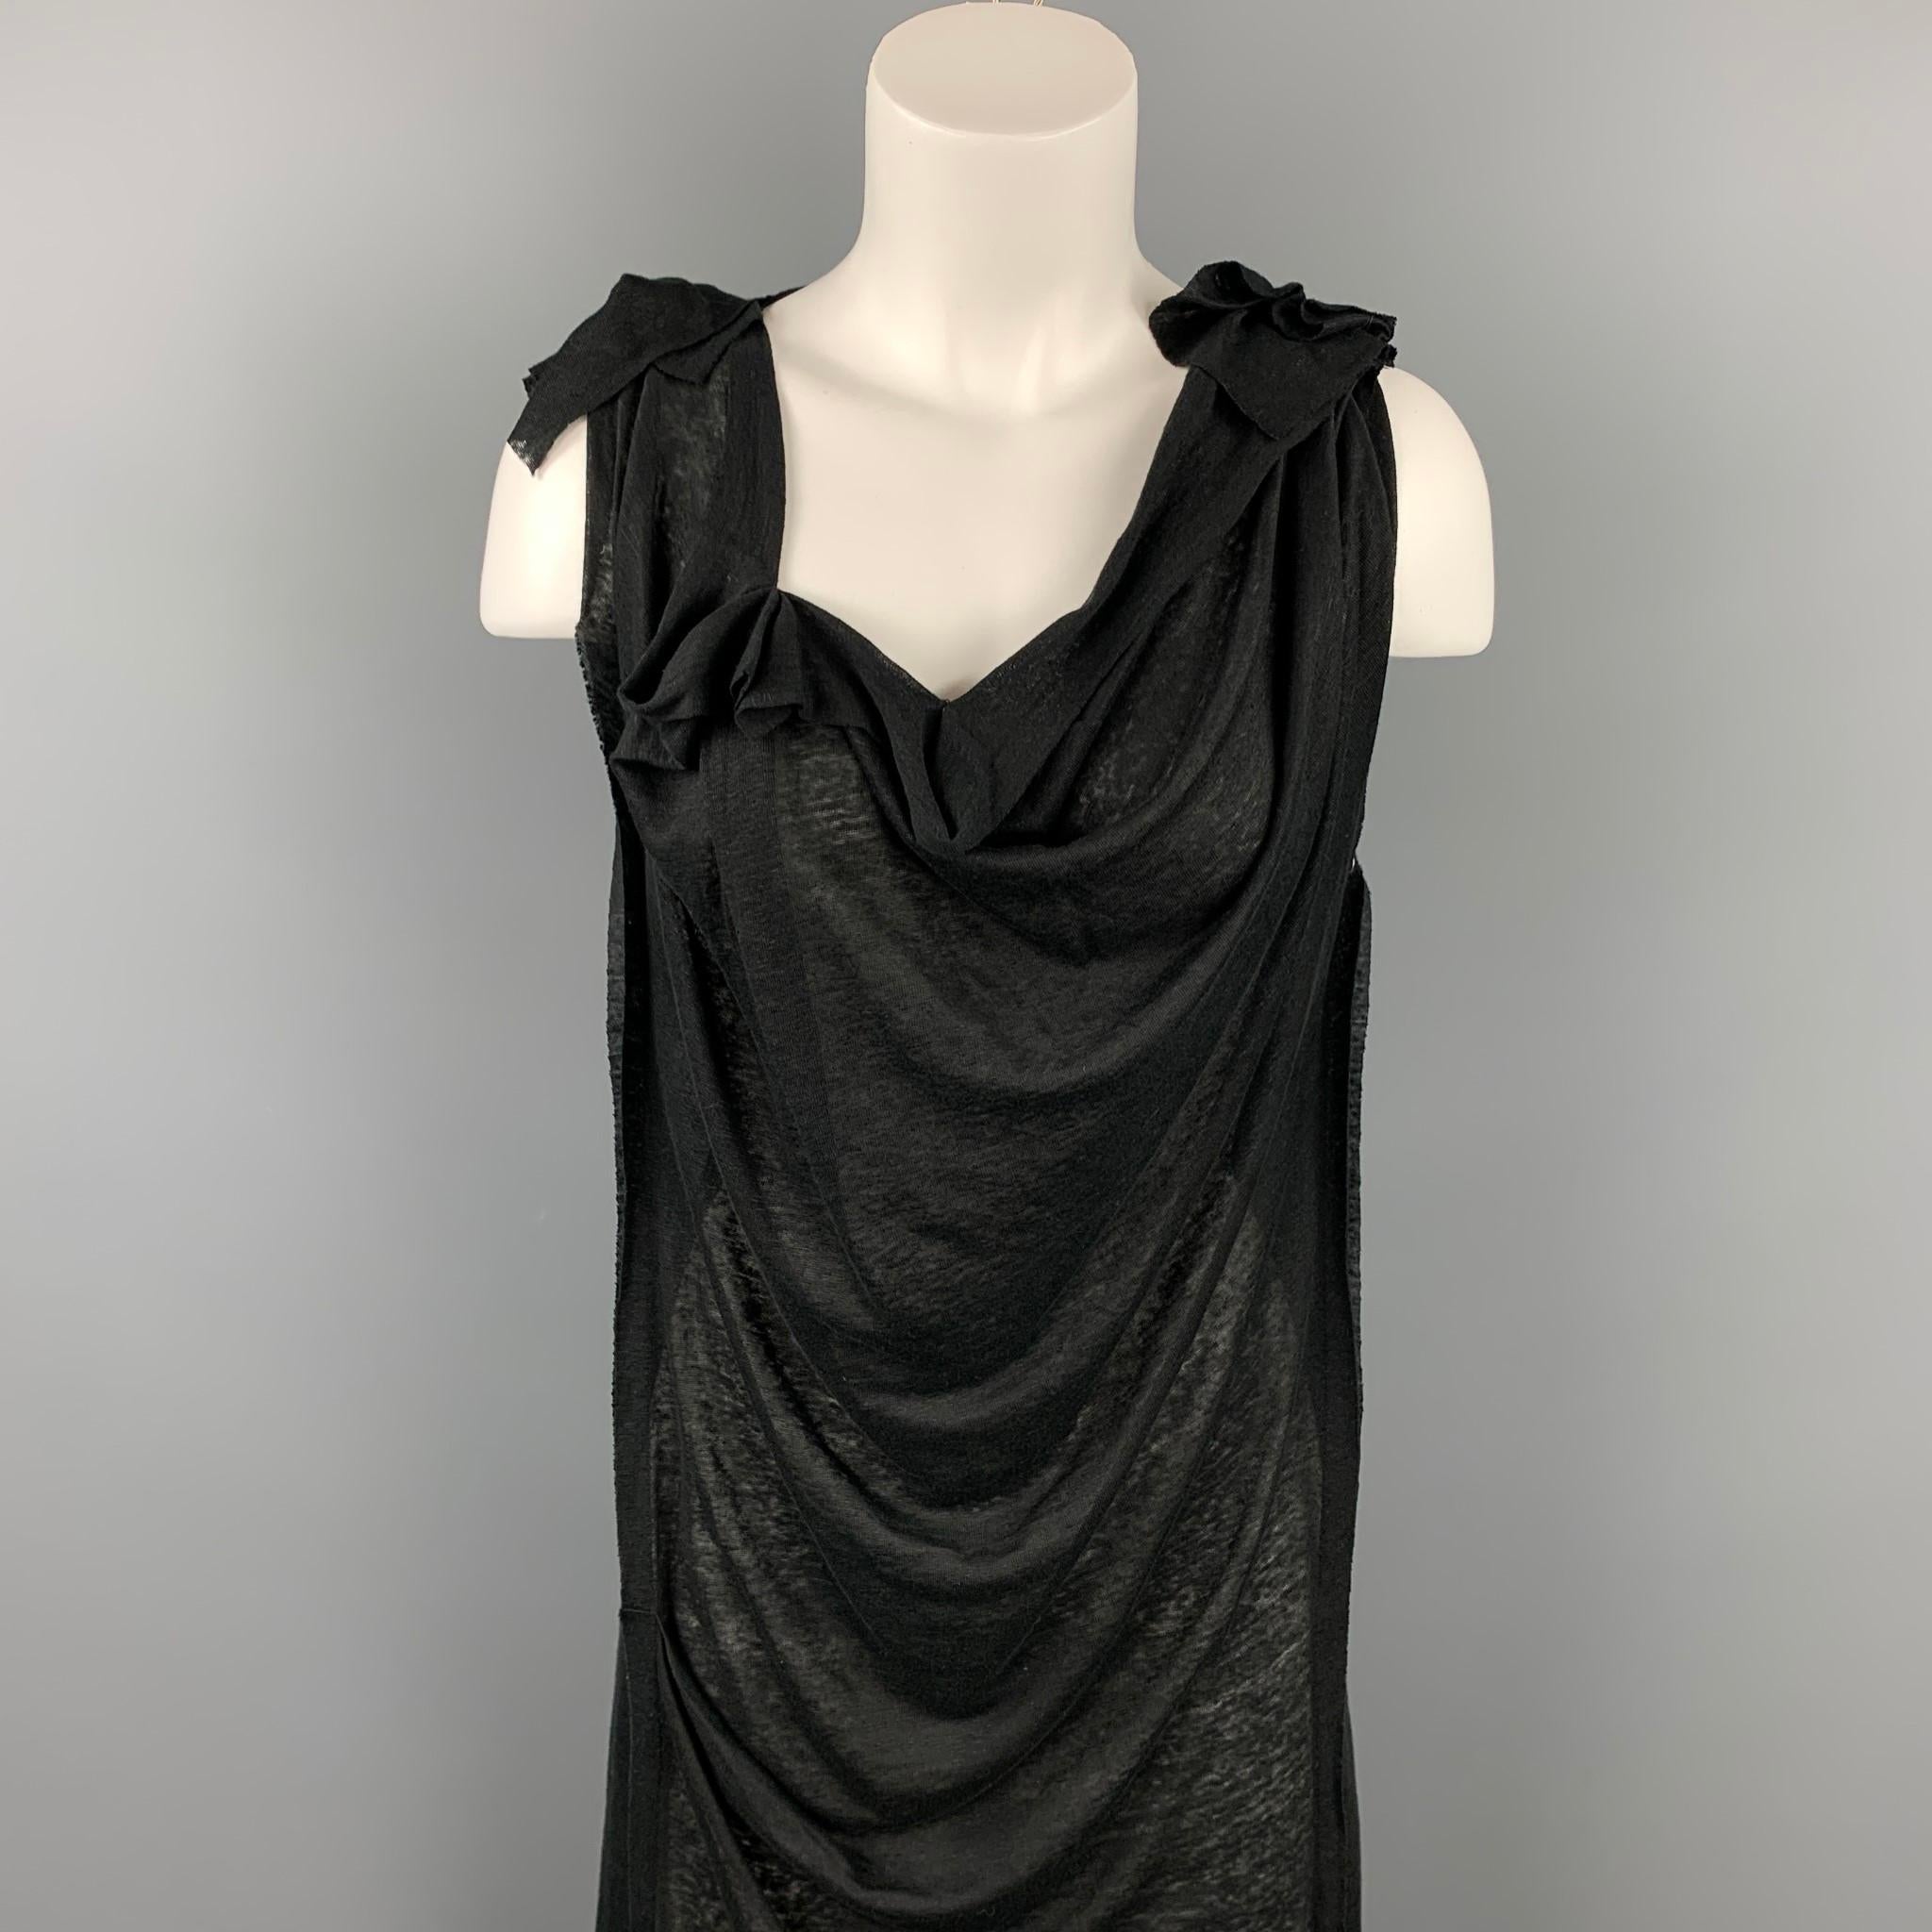 FORME 3’3204322896 dress comes in a black jersey linen featuring a shift style and a ruffled front. Made in Italy.

Very Good Pre-Owned Condition.
Marked: S

Measurements:

Bust: 30 in.
Hip: 35 in.
Length: 43 in. 